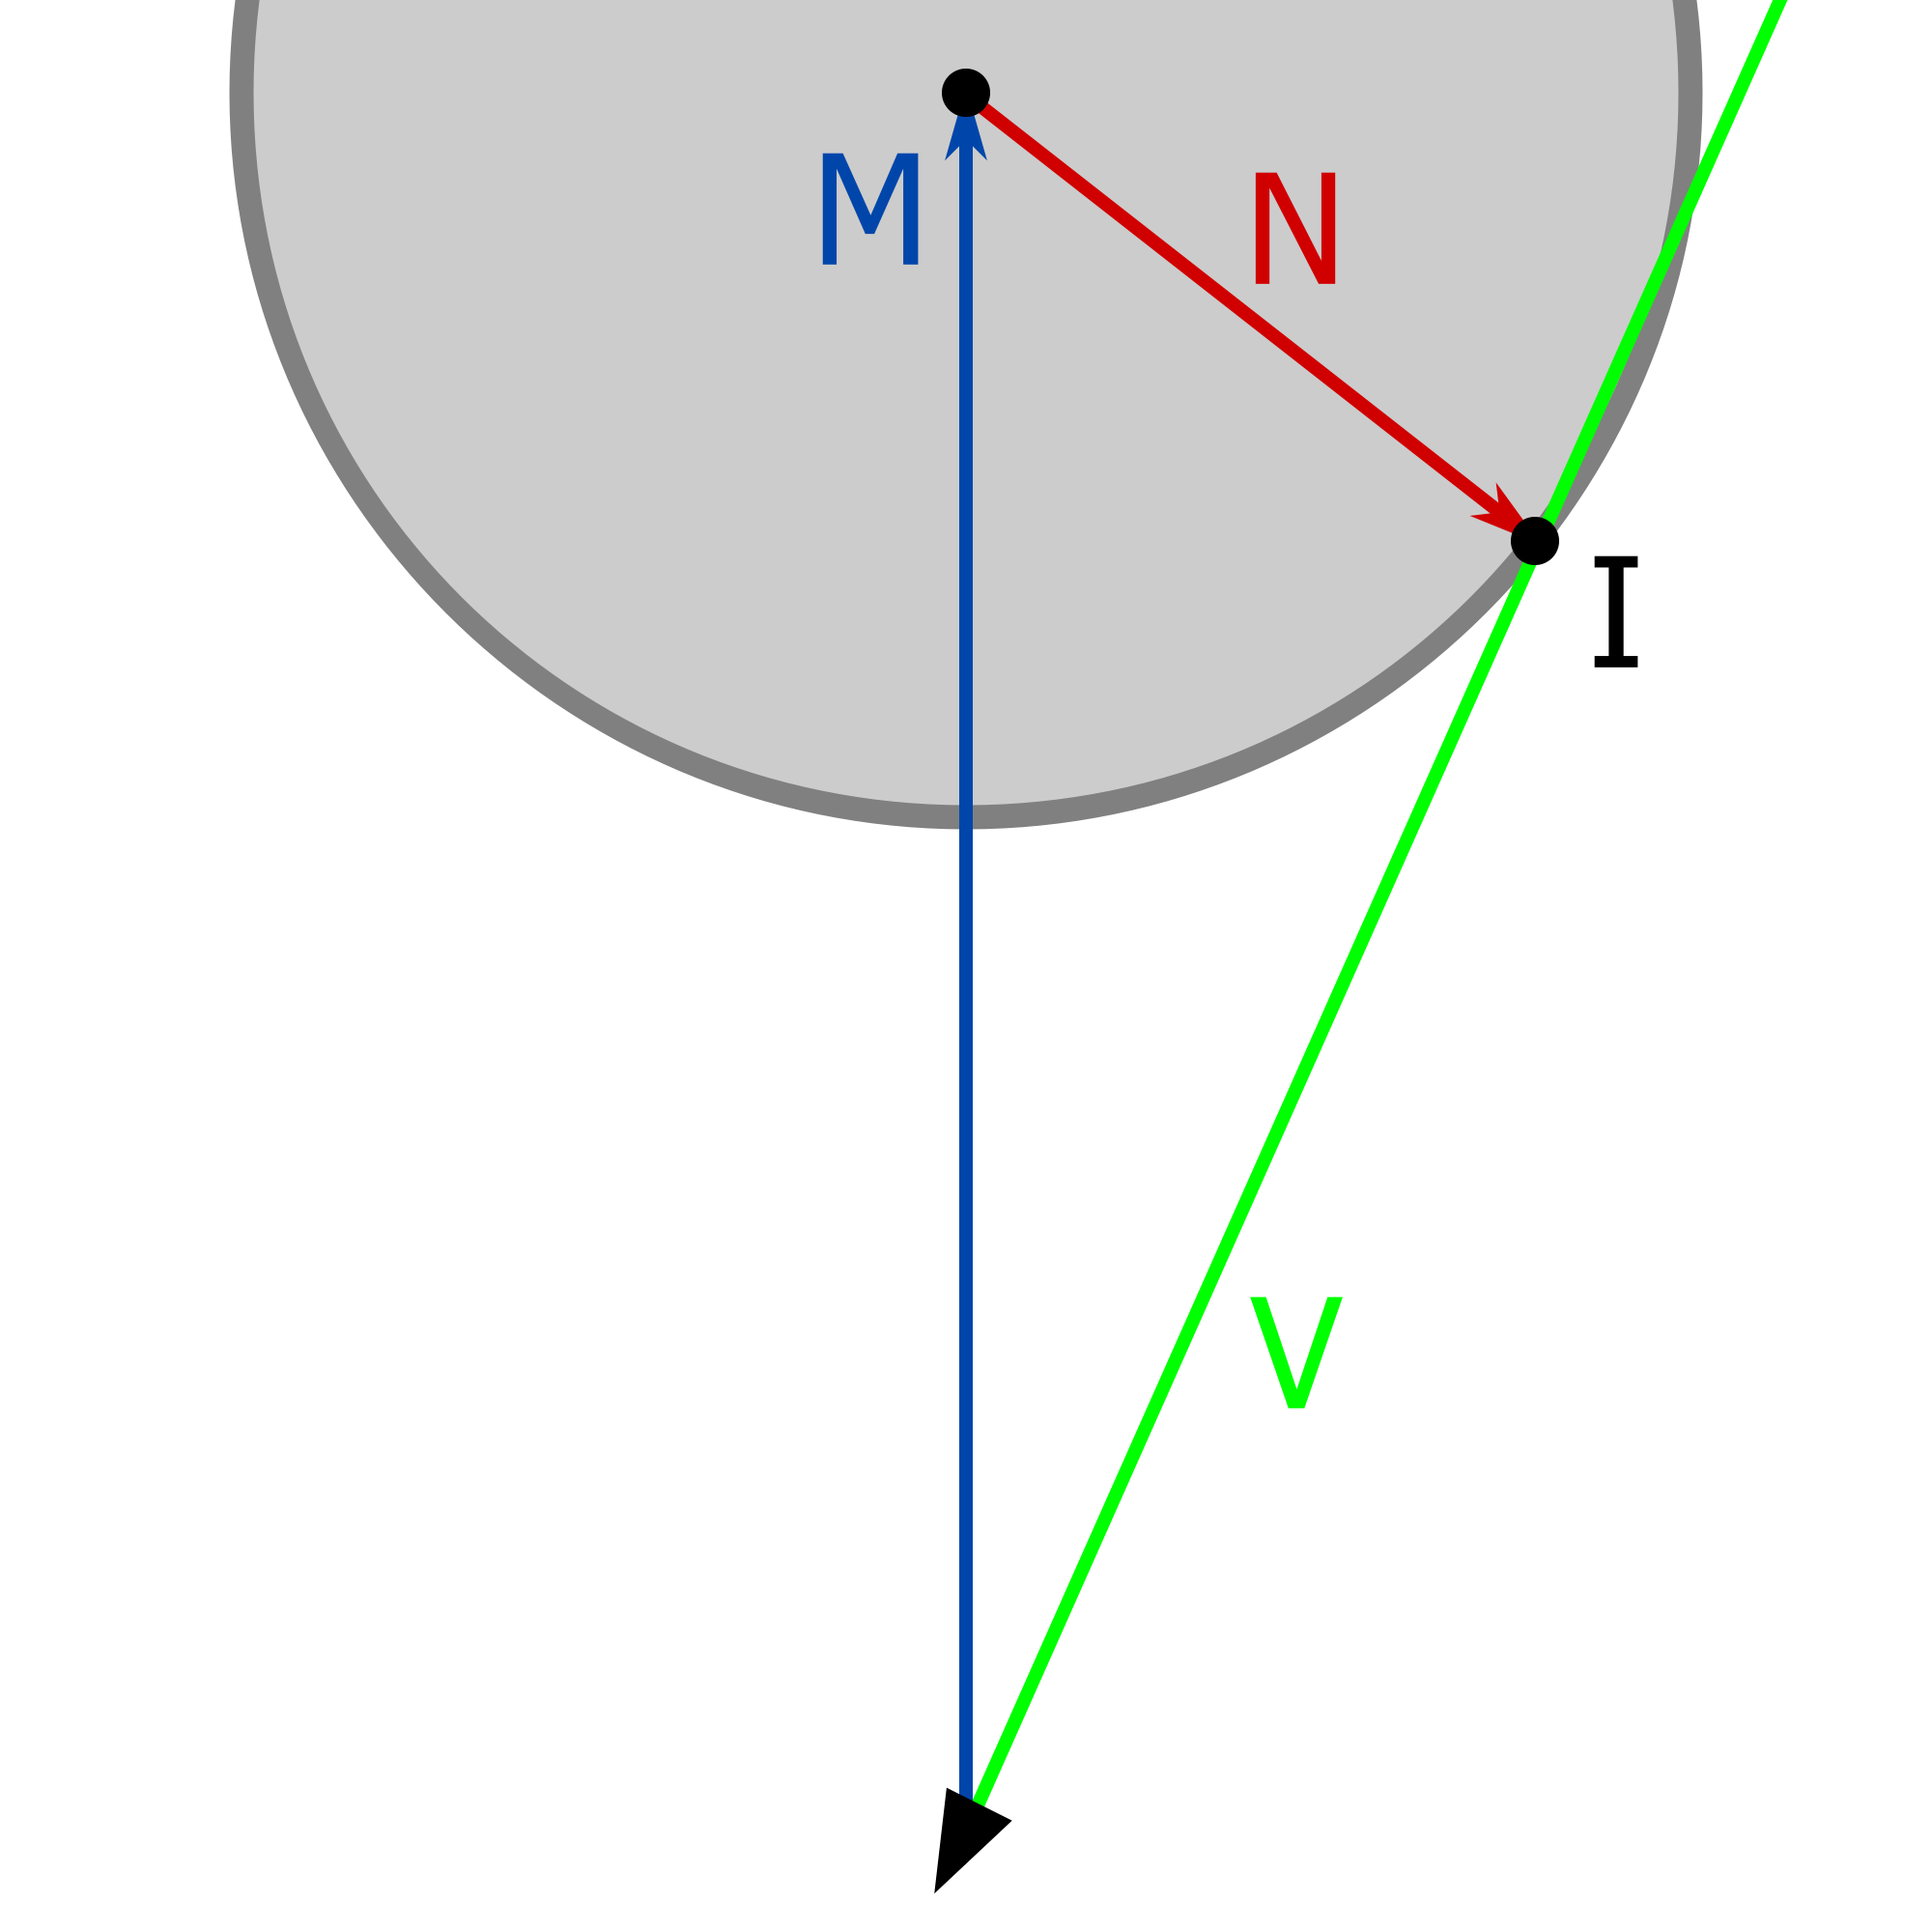 Schematic for calculating the moon's normal, where M is the moon direction, V view direction, I intersection point, and N the normal.